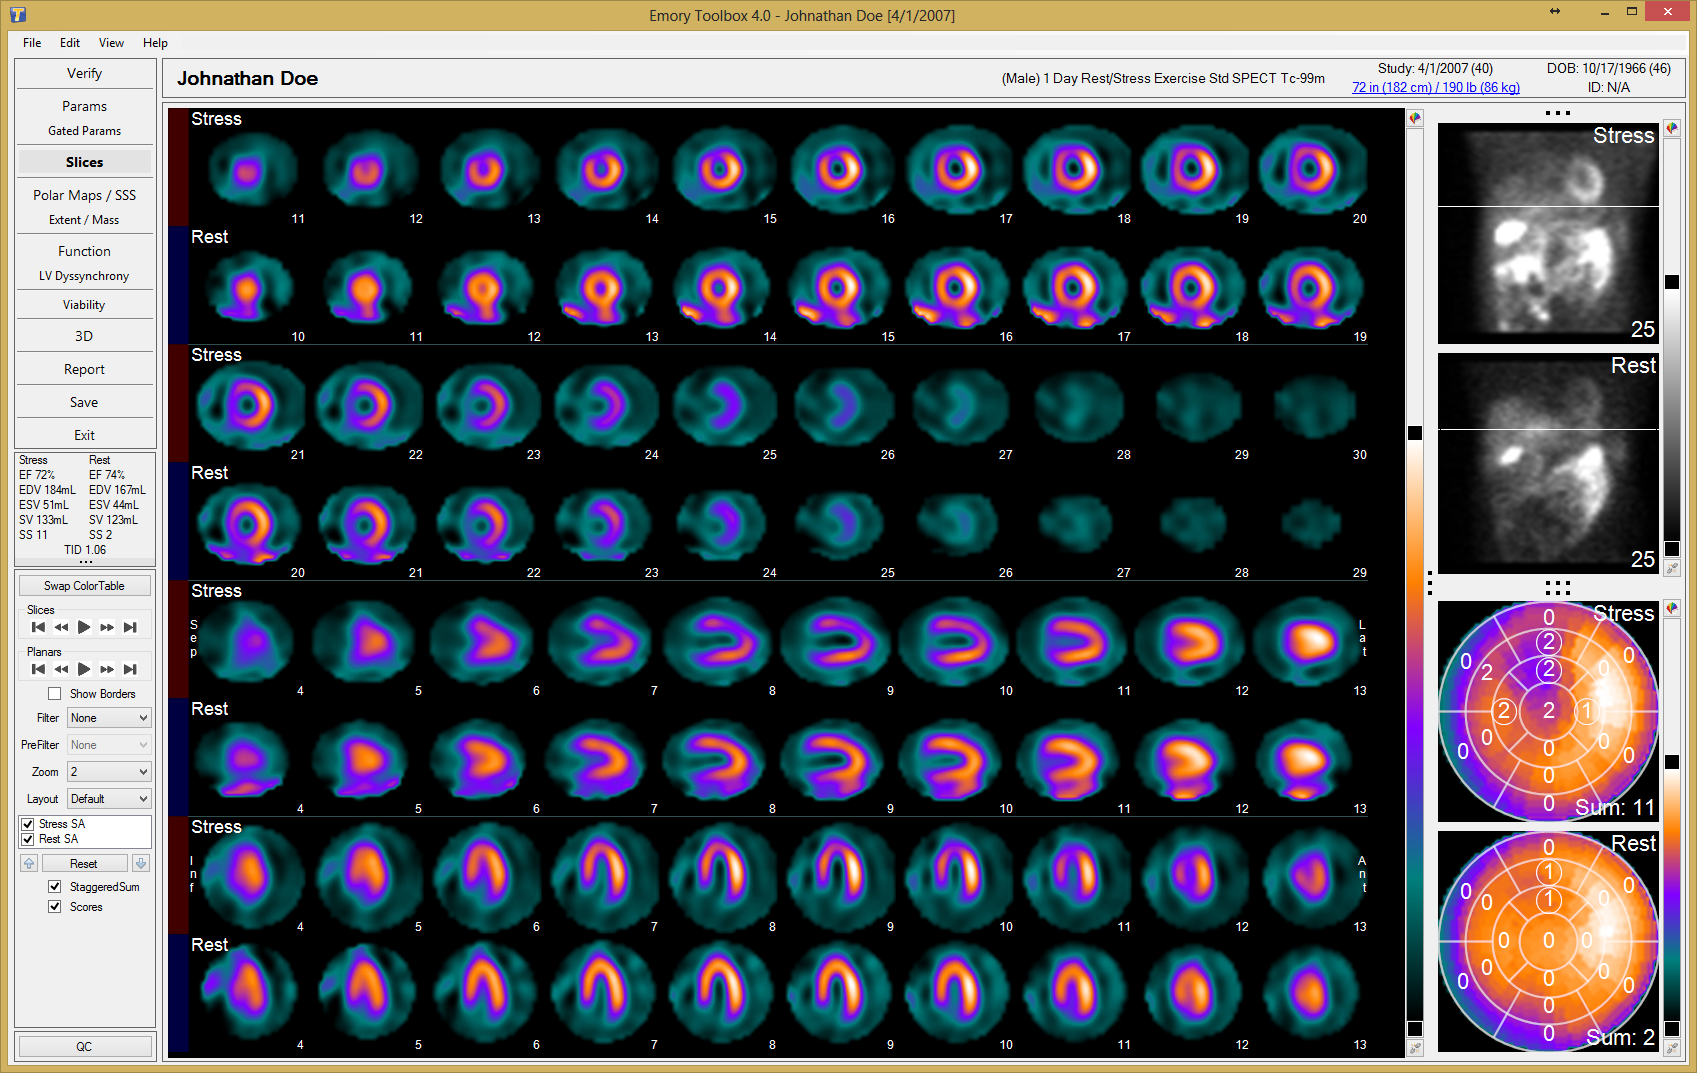 Syntermed's Emory Toolbox 4.0 decision support software shows a slices screen shot for a myocardial perfusion SPECT study.